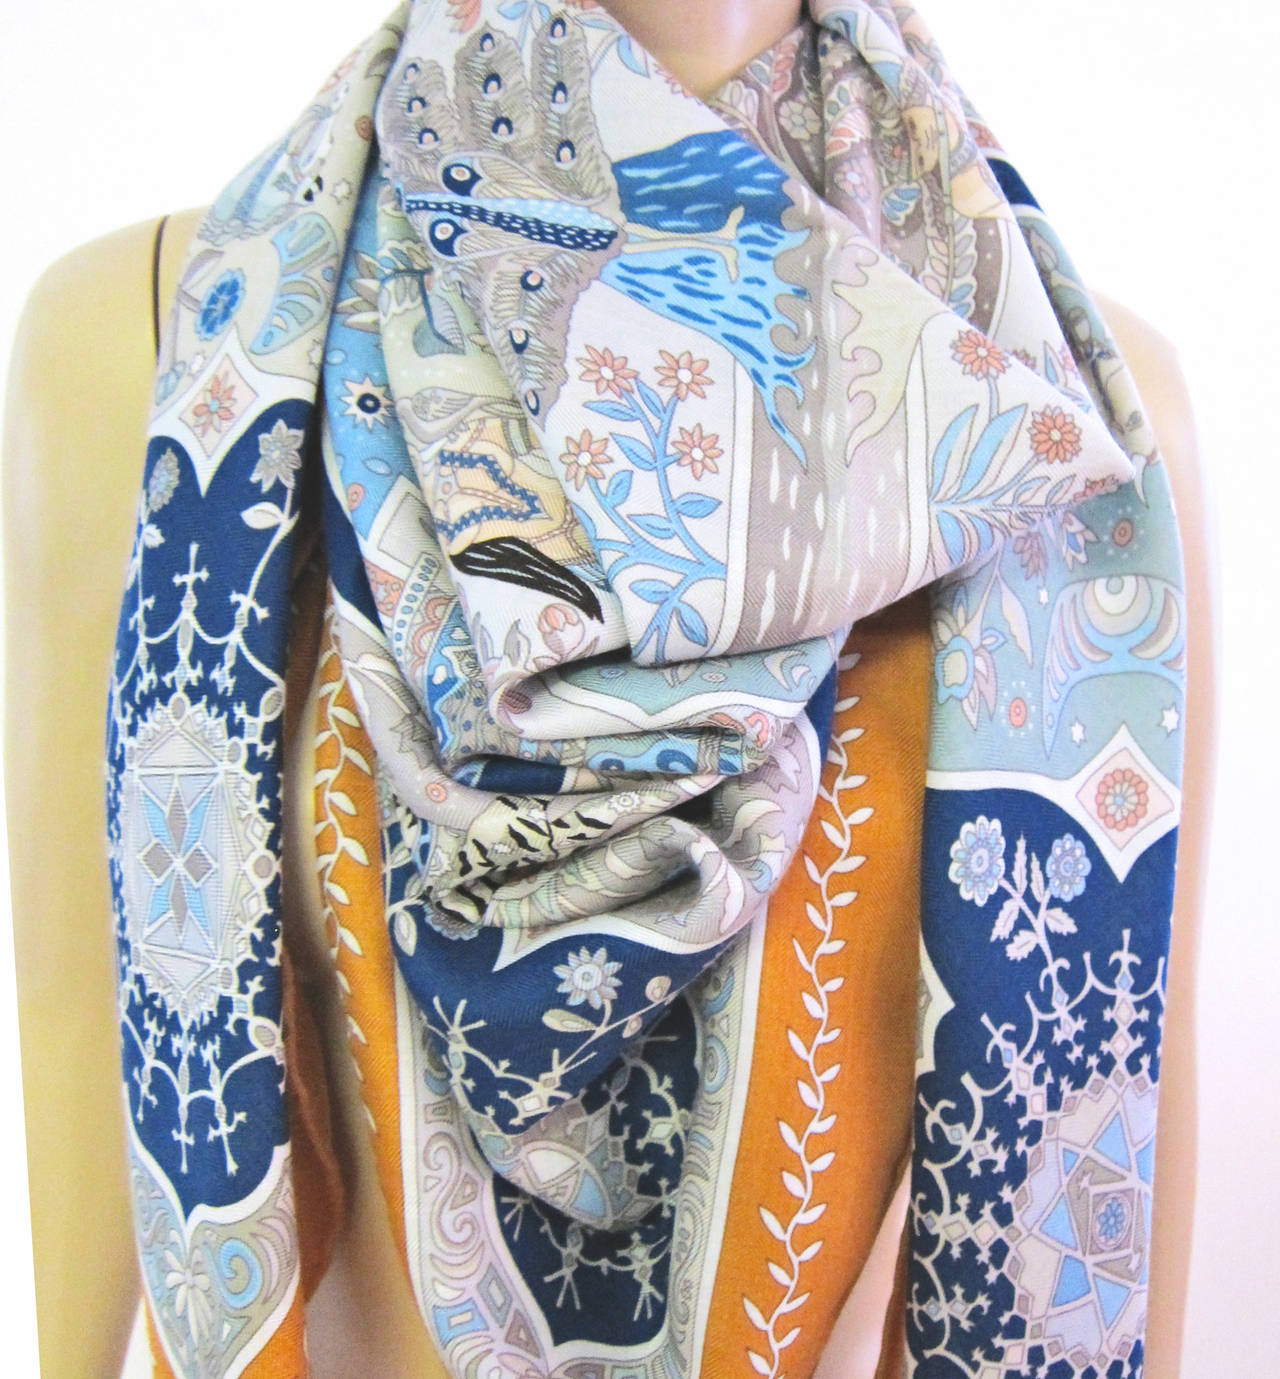 Hermes Aux Portes du Palais Ochre Cashmere Silk Shawl Scarf GM 140cm
Ethereal!
Colors:  Ochre, grey-green, blue, peachy pink, grey, dark blue…
Brand new in box.  Absolutely store fresh.  Never used with no issues or flaws.  
Comes brand new with